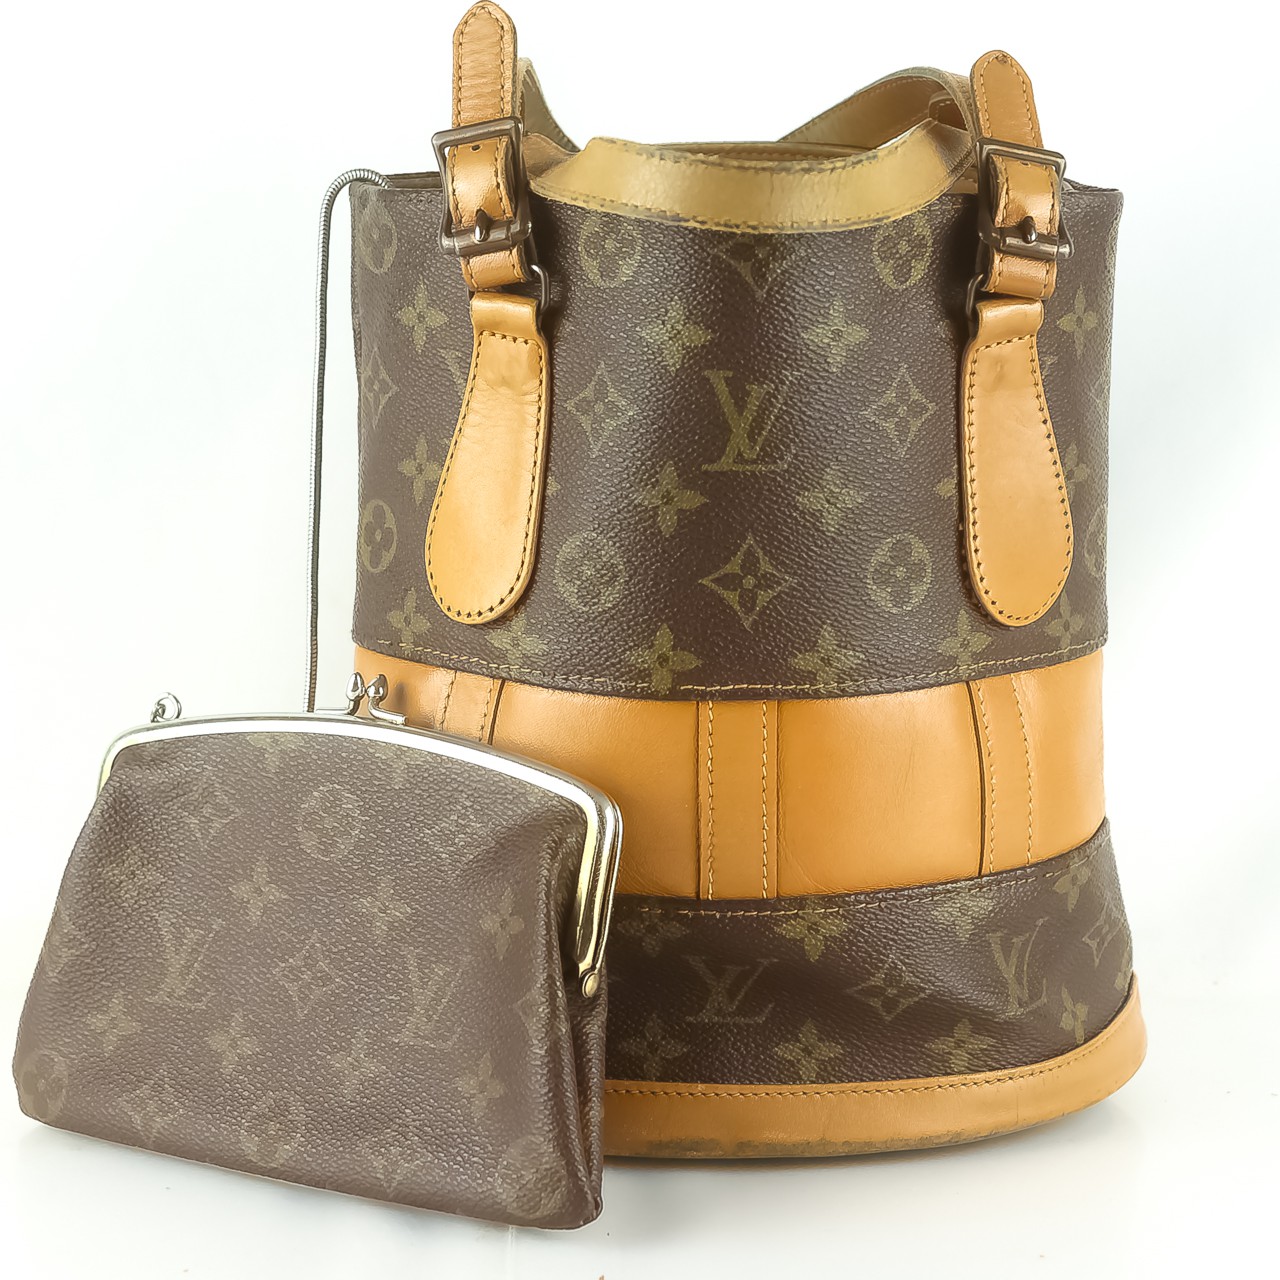 LOUIS VUITTON ルイヴィトン バケツ型トートバッグ バケット